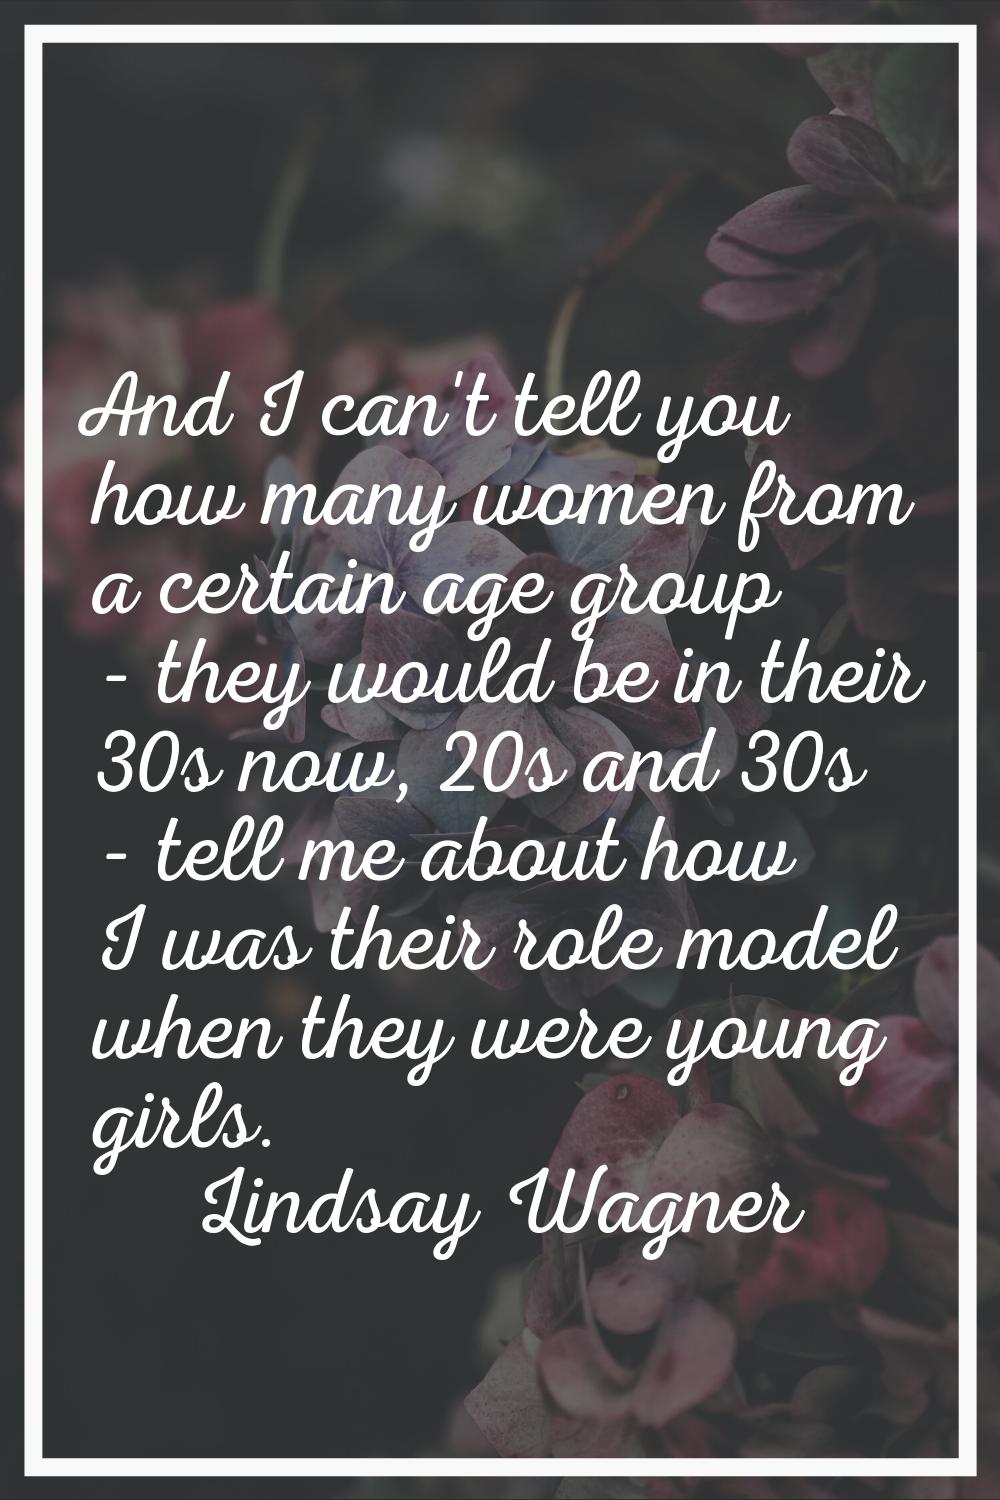 And I can't tell you how many women from a certain age group - they would be in their 30s now, 20s 